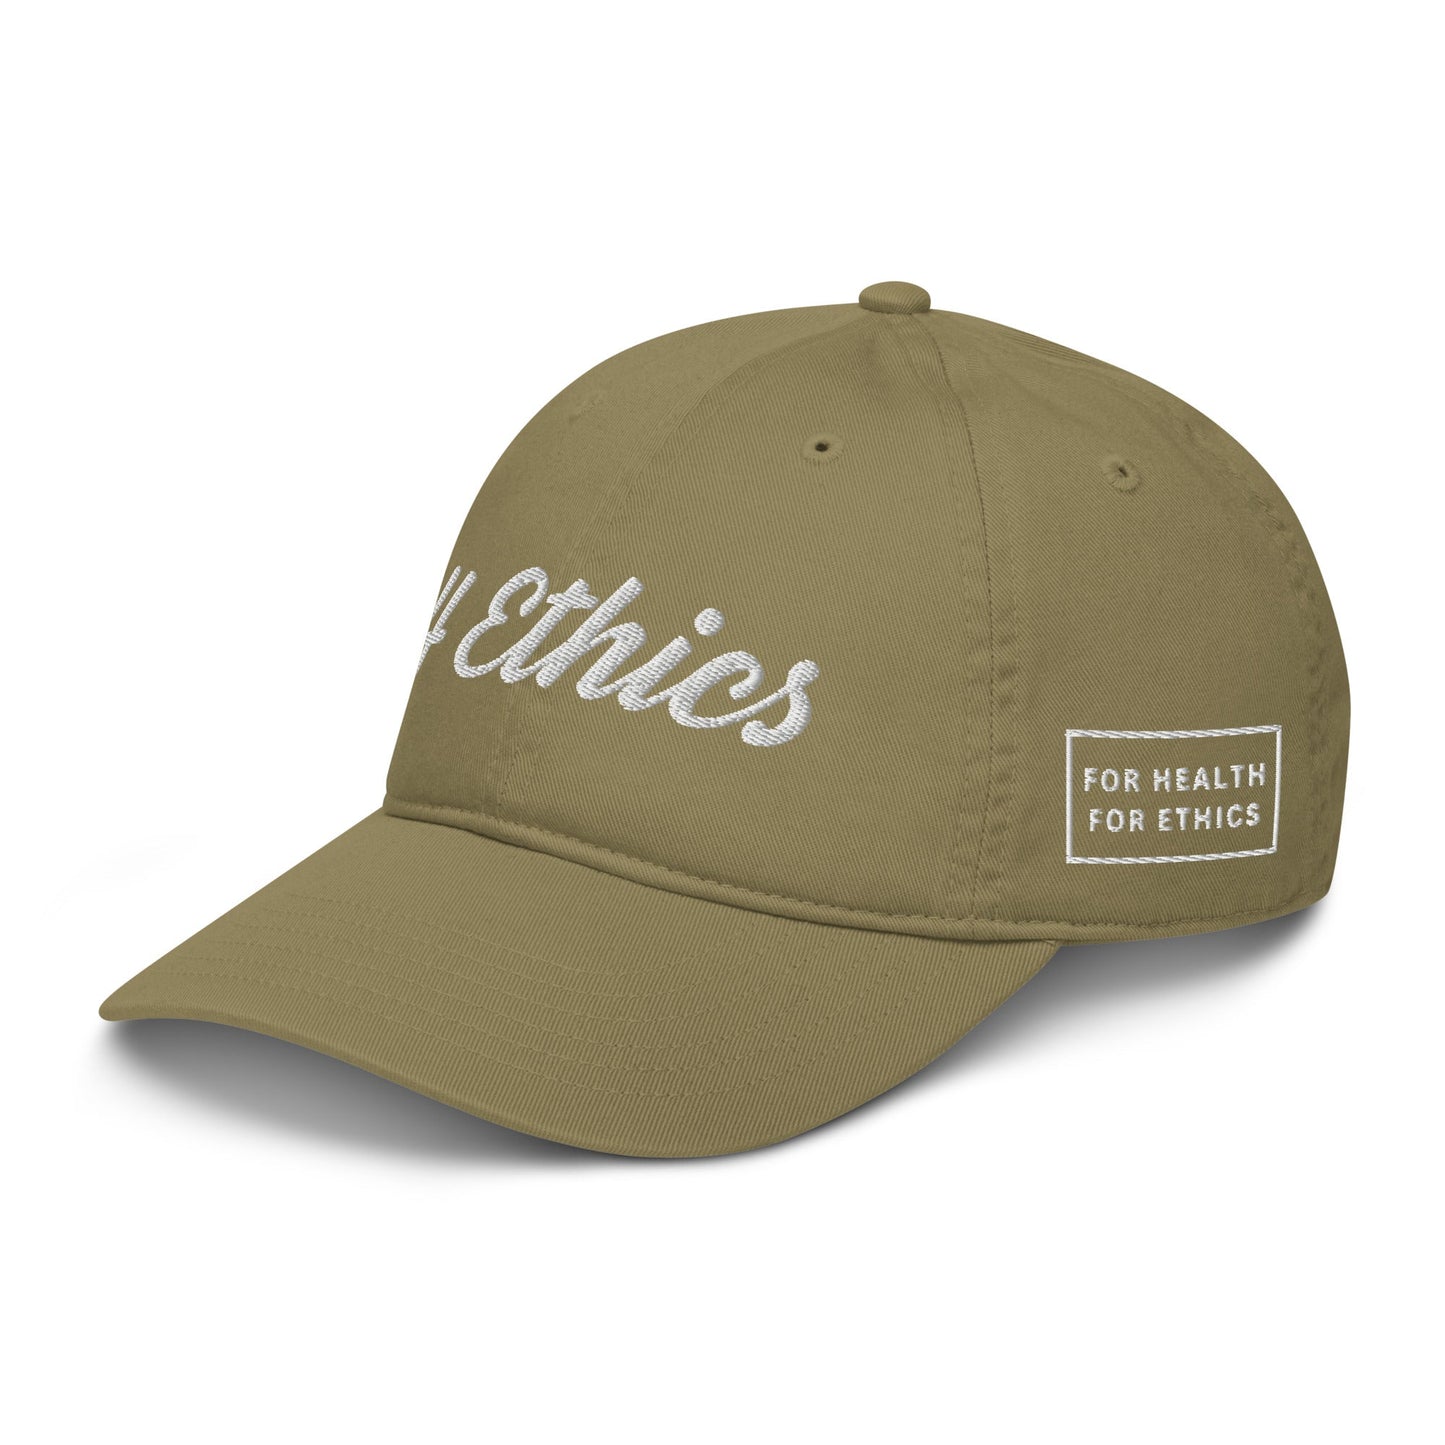 4 Ethics Organic Hat - For Health For Ethics - Jungle -Other Side